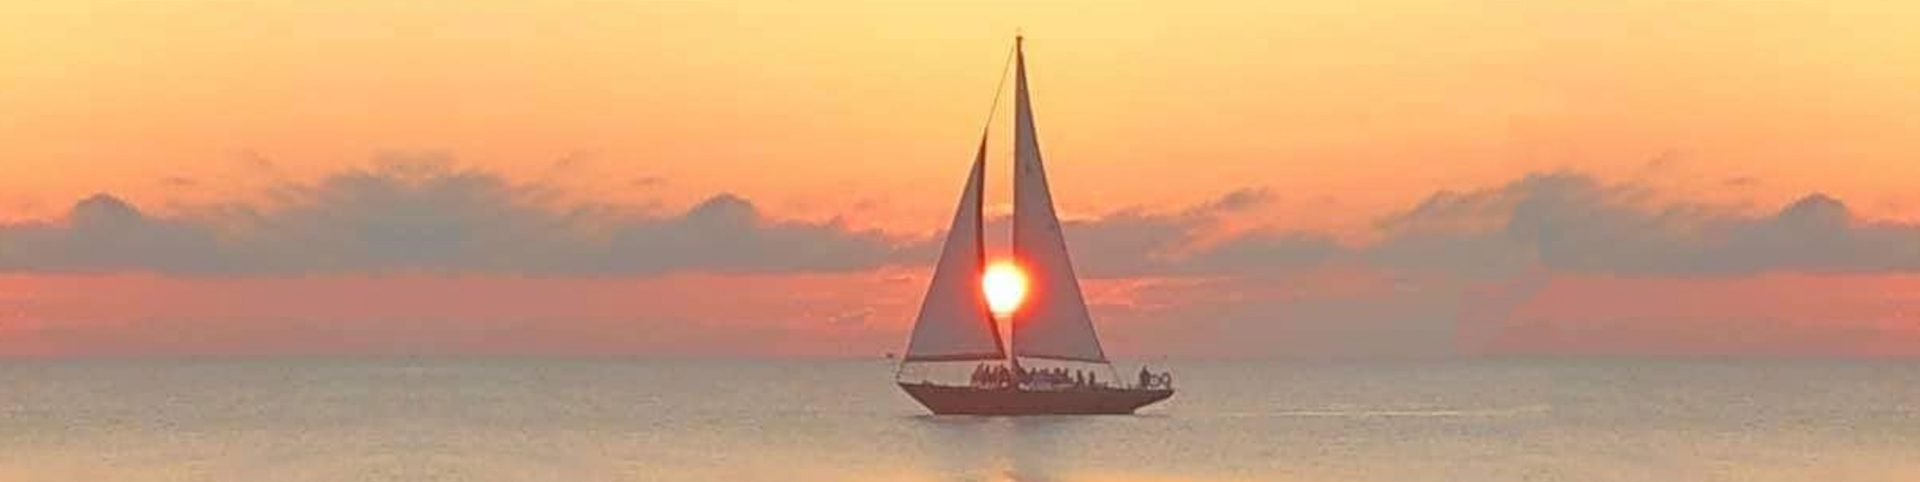 Red Witch II Sunset Sail